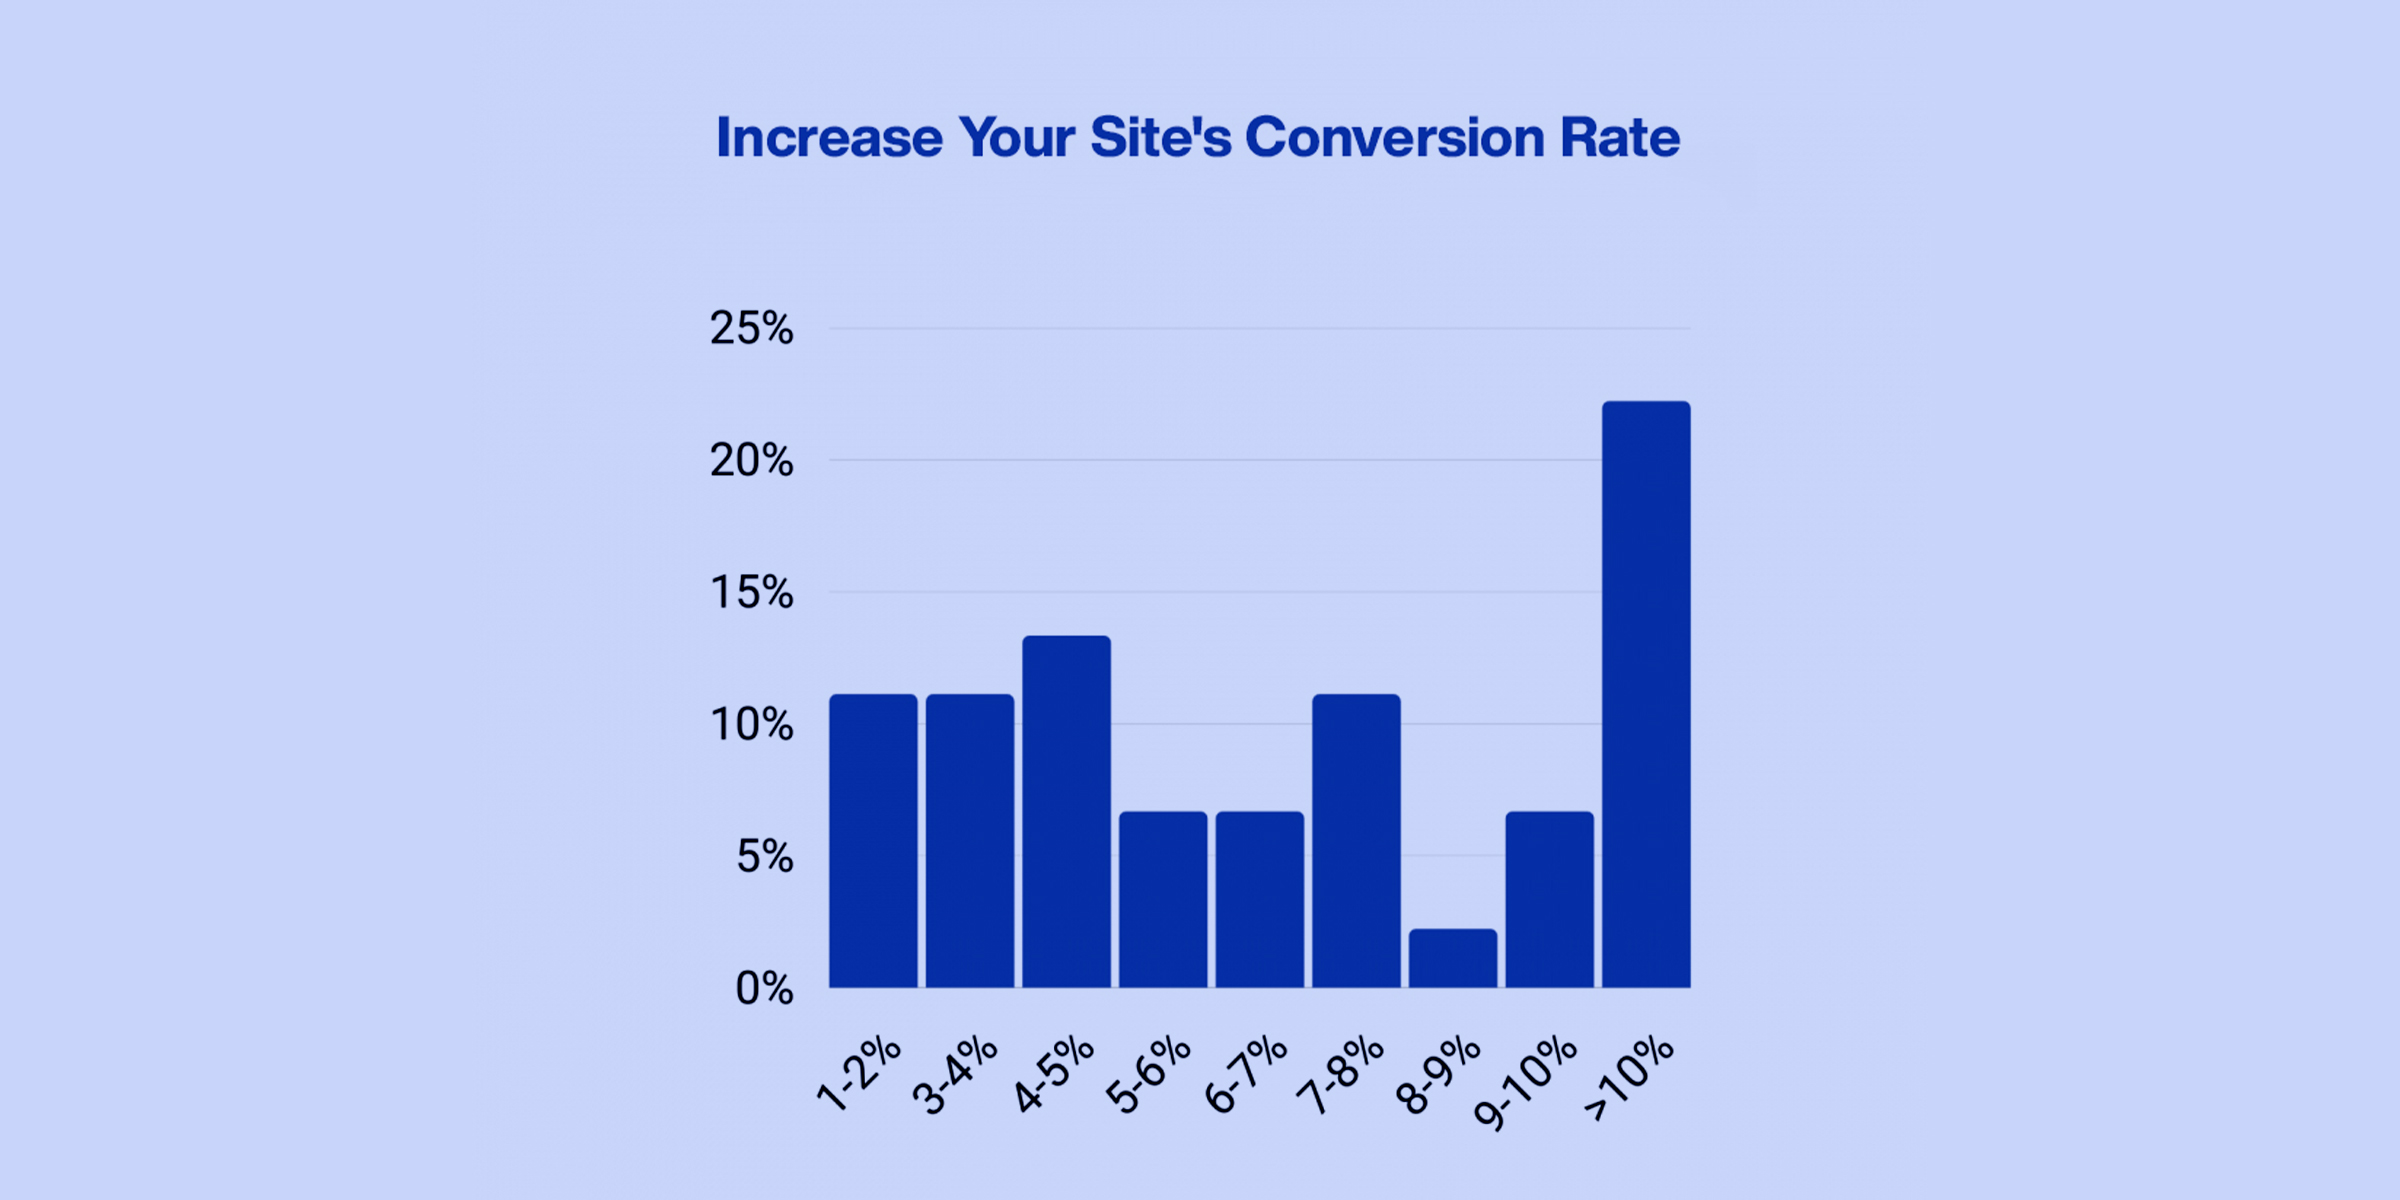 Increase Your Site's Conversion Rate